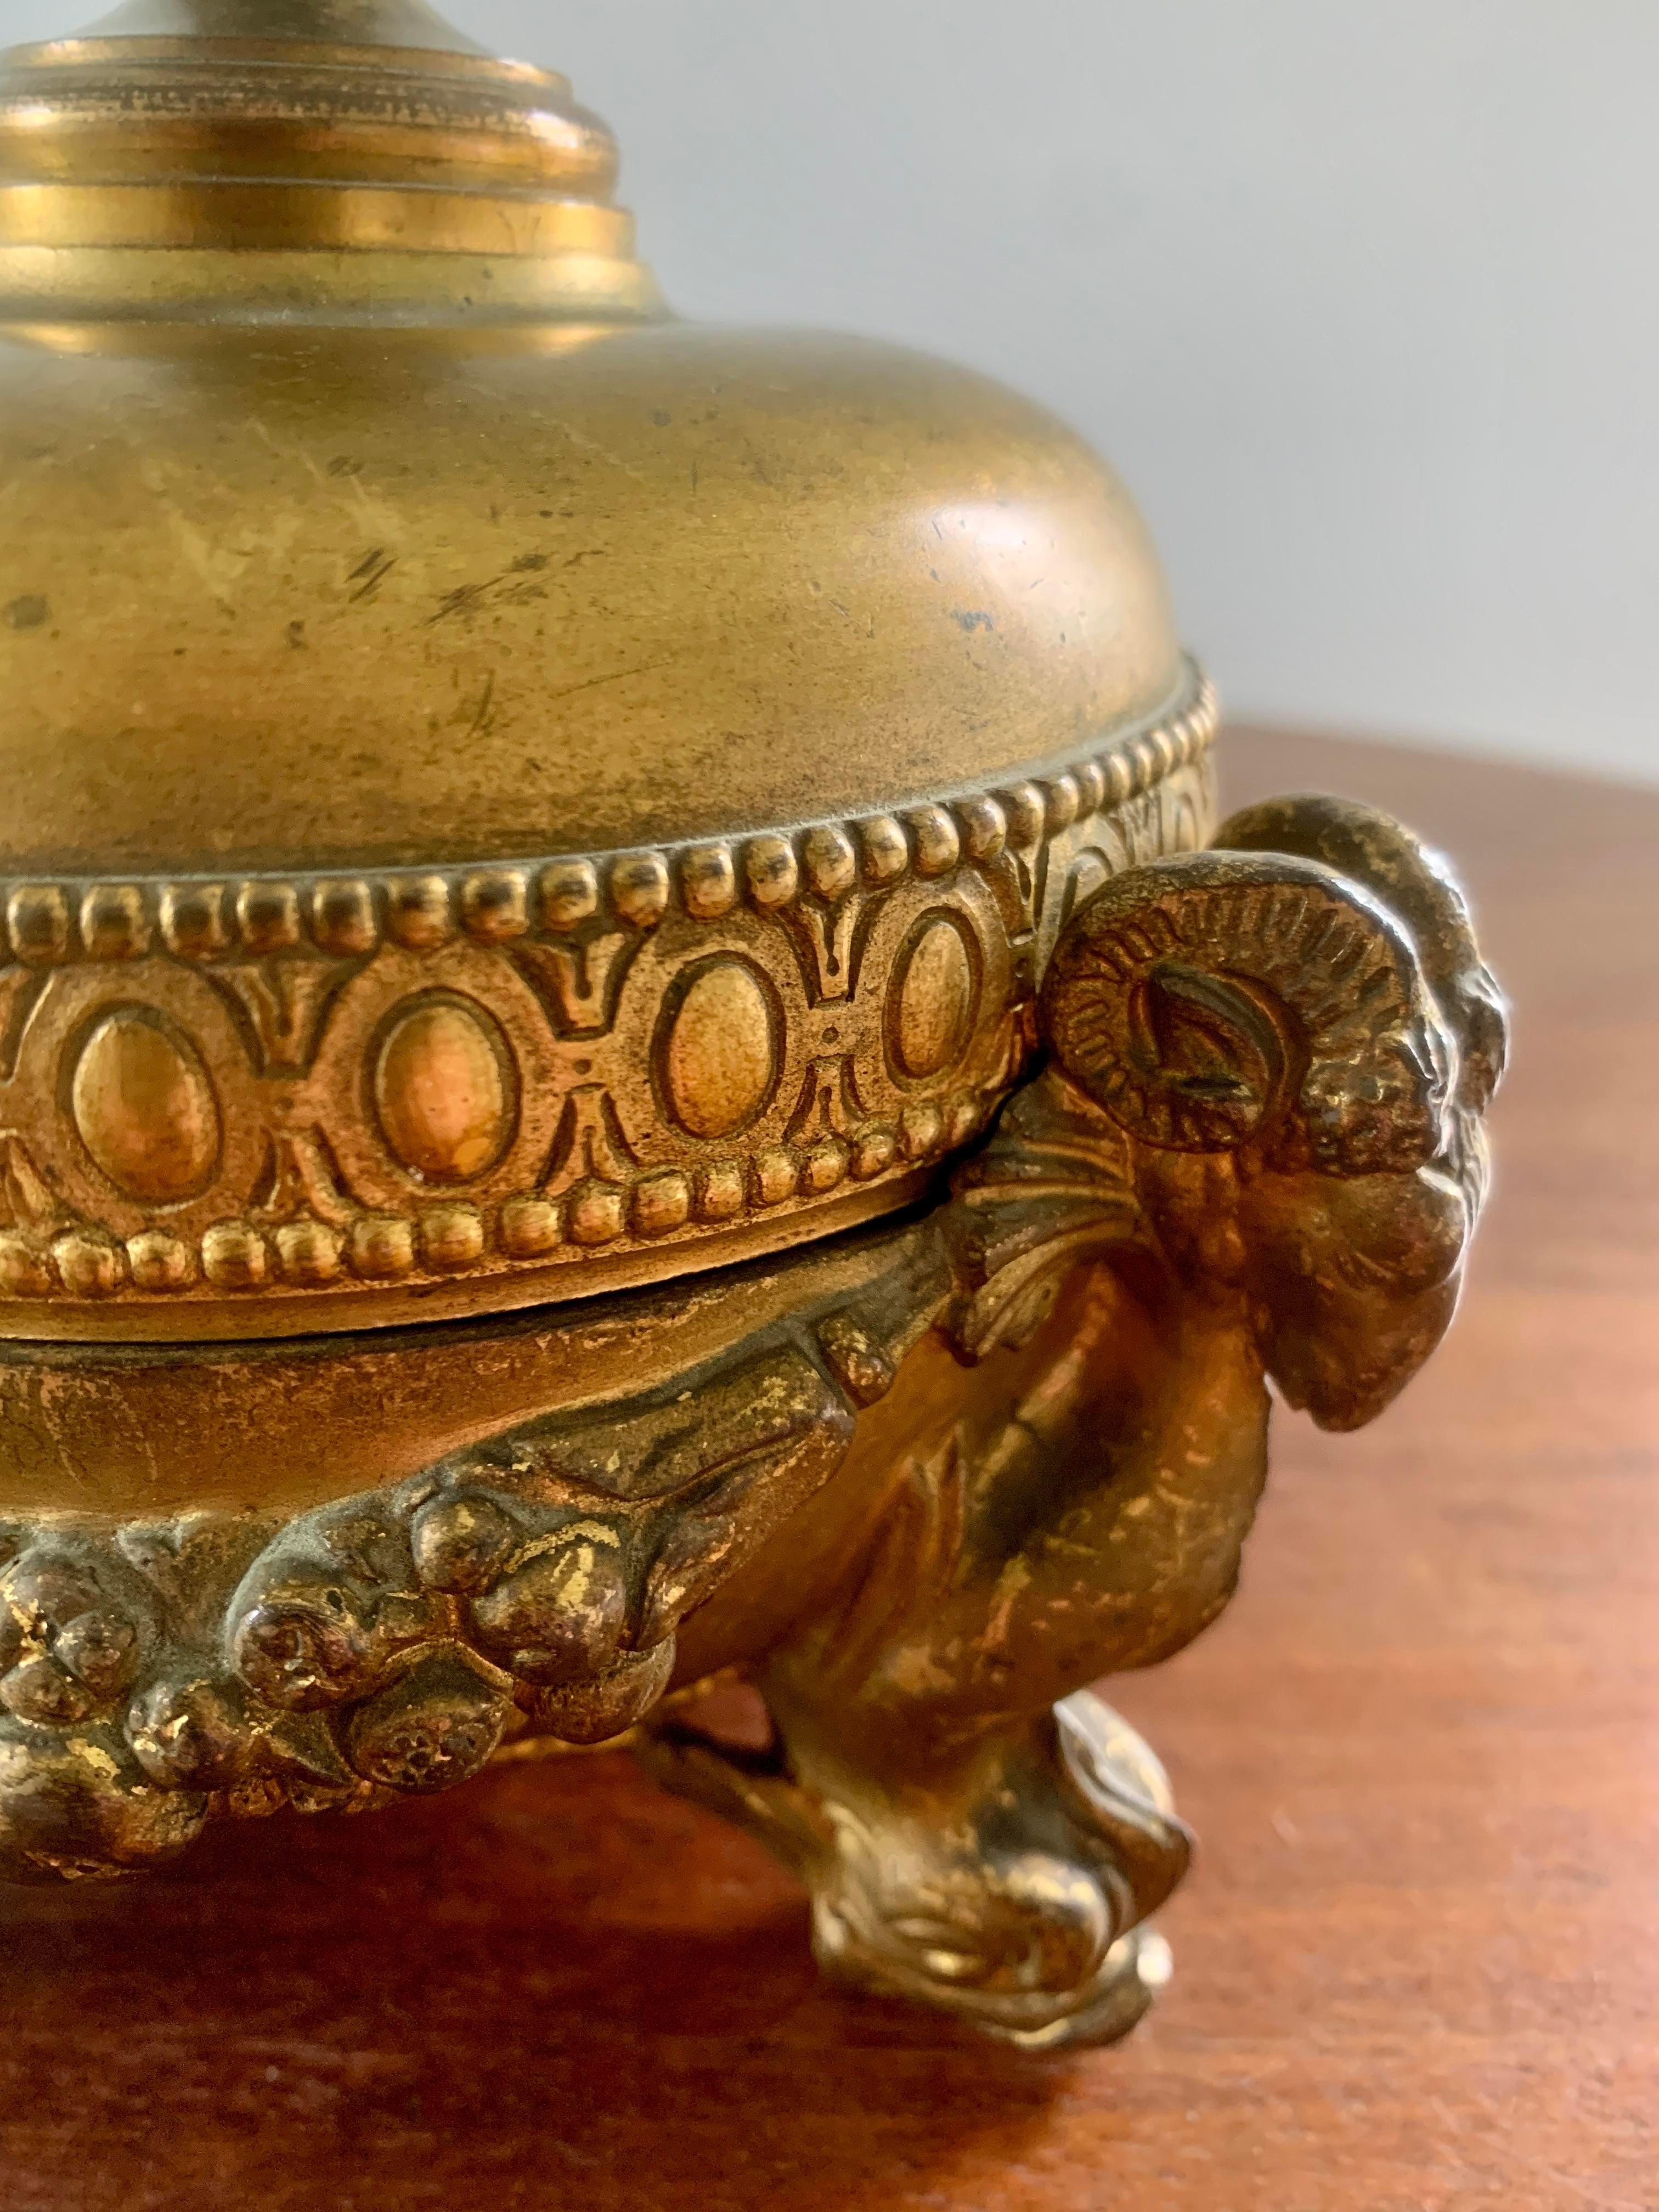 A gorgeous neoclassical grand tour style gilt metal lidded bowl featuring ram's heads and dolphin feet

Circa early 20th century

Measures: 6.25